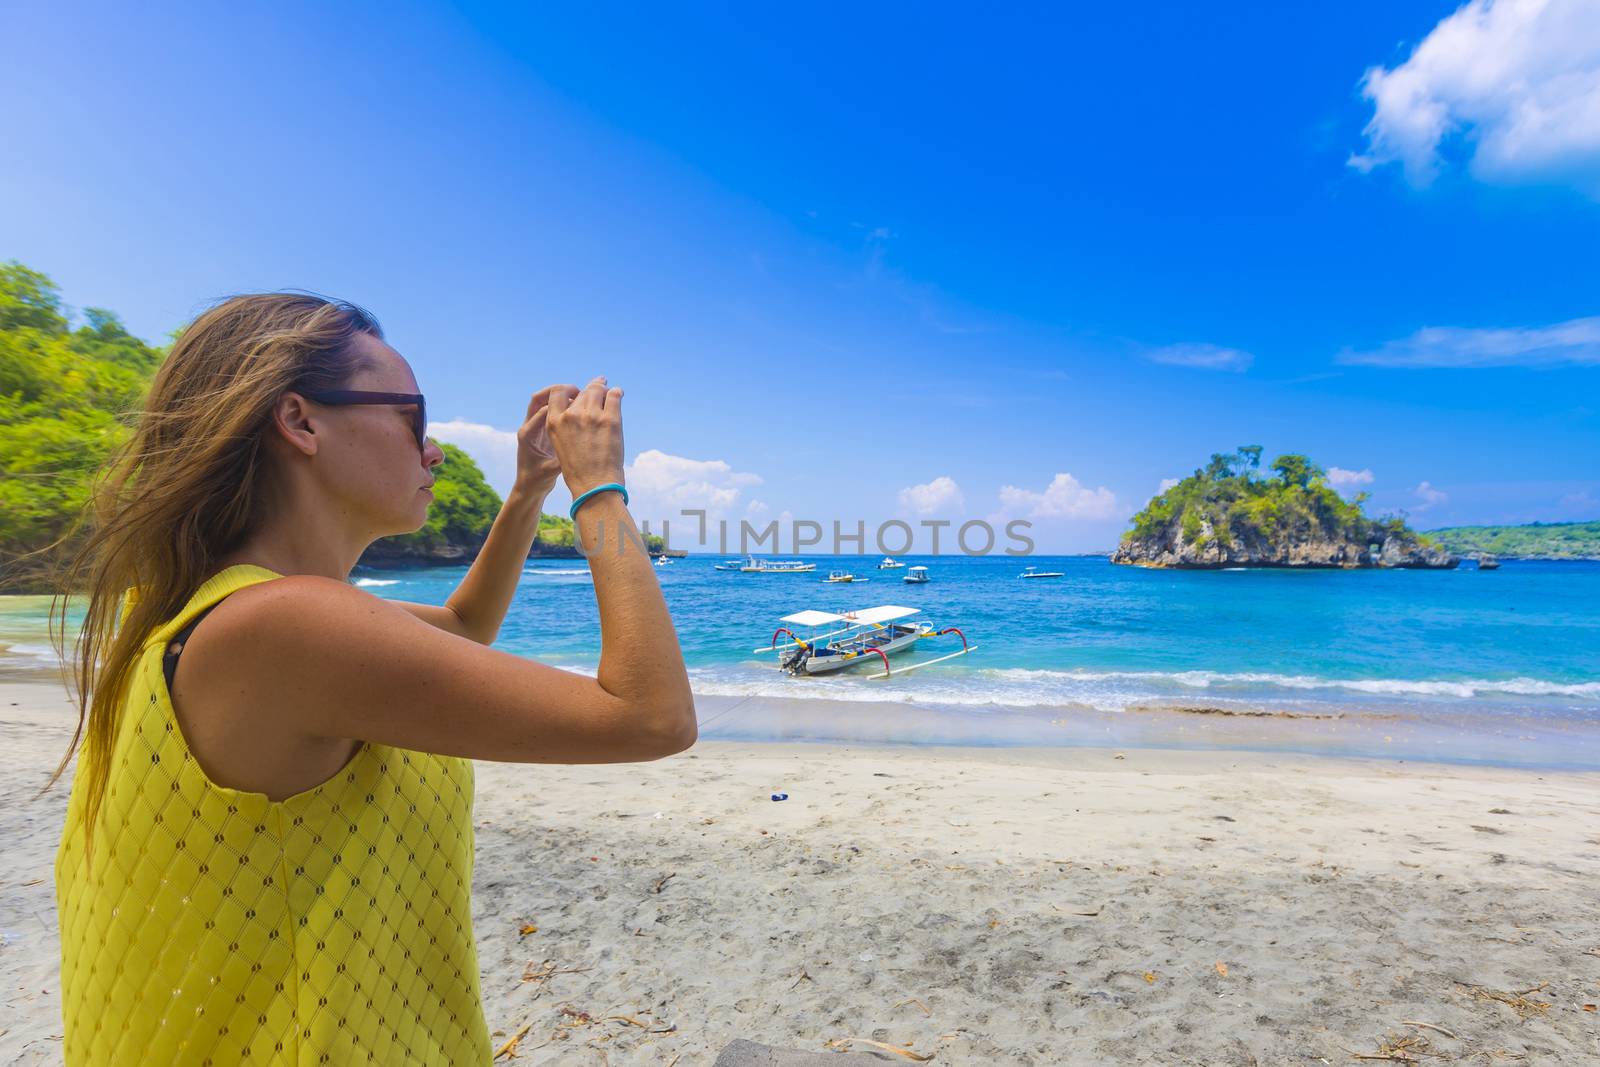 Cheerful Girl Talking Pictures with Digital Camera, Nusa Penida, Indonesia.
released